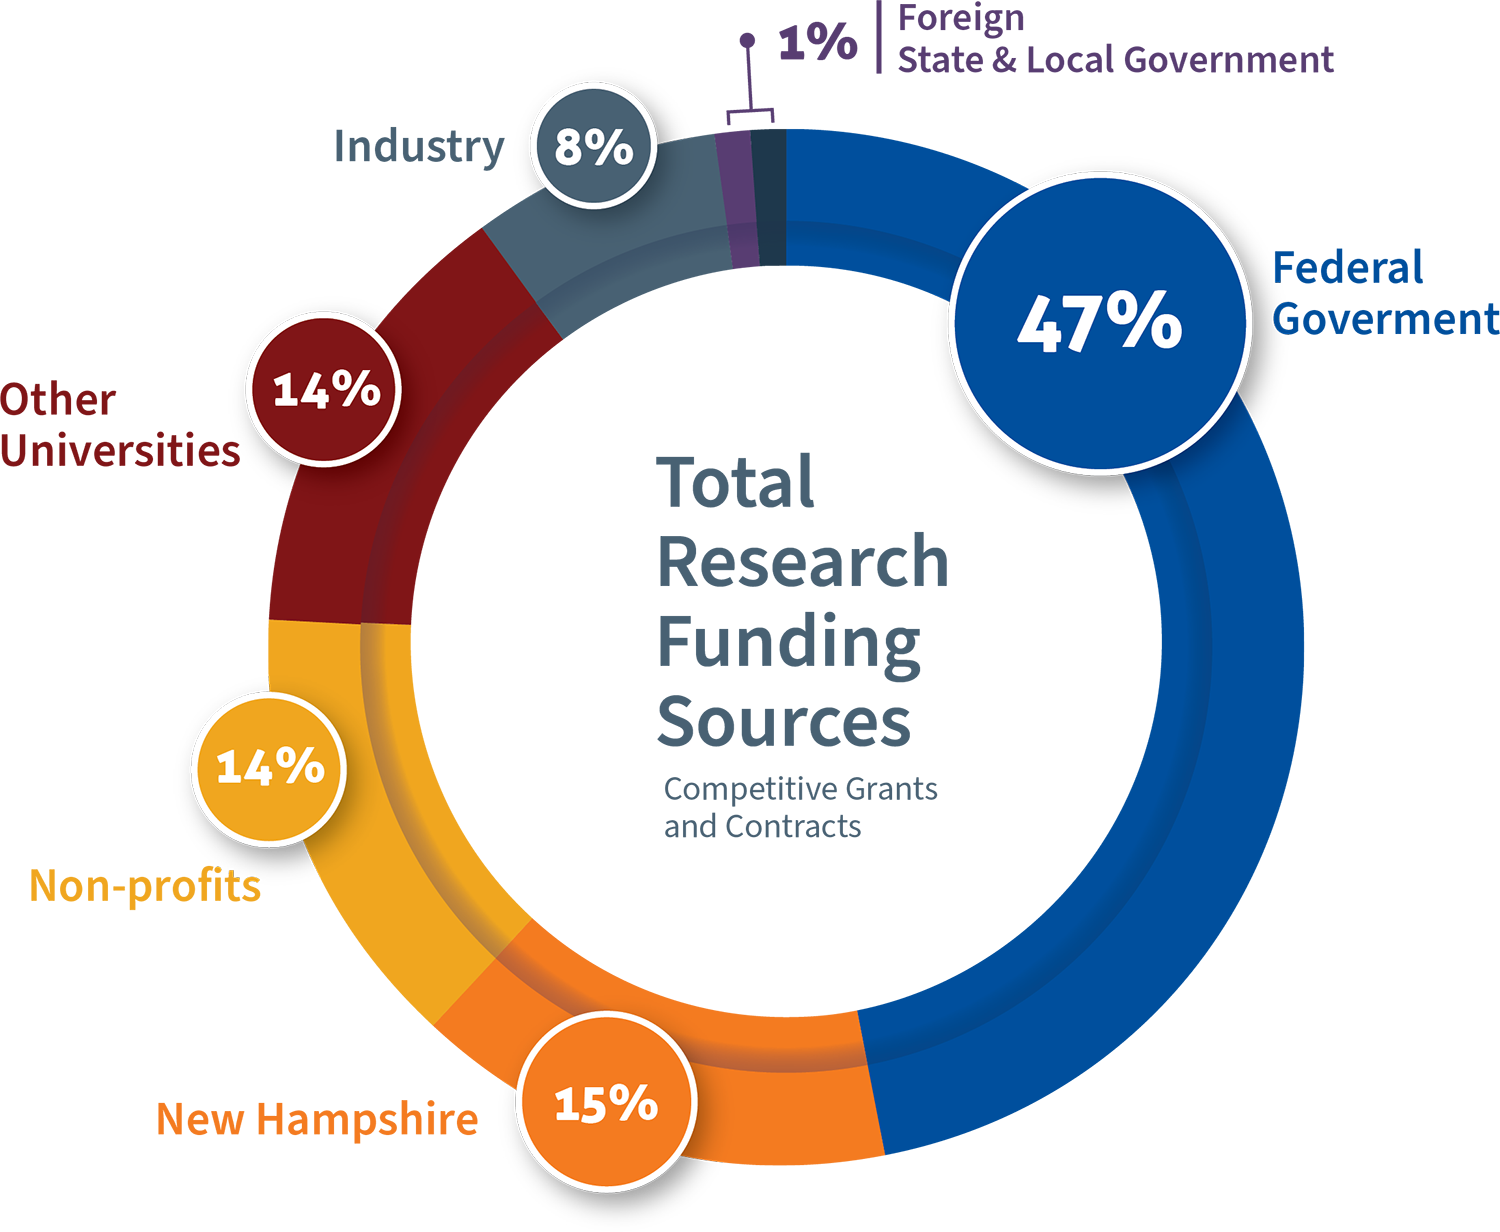 Pie chart of Total Research Funding Sources